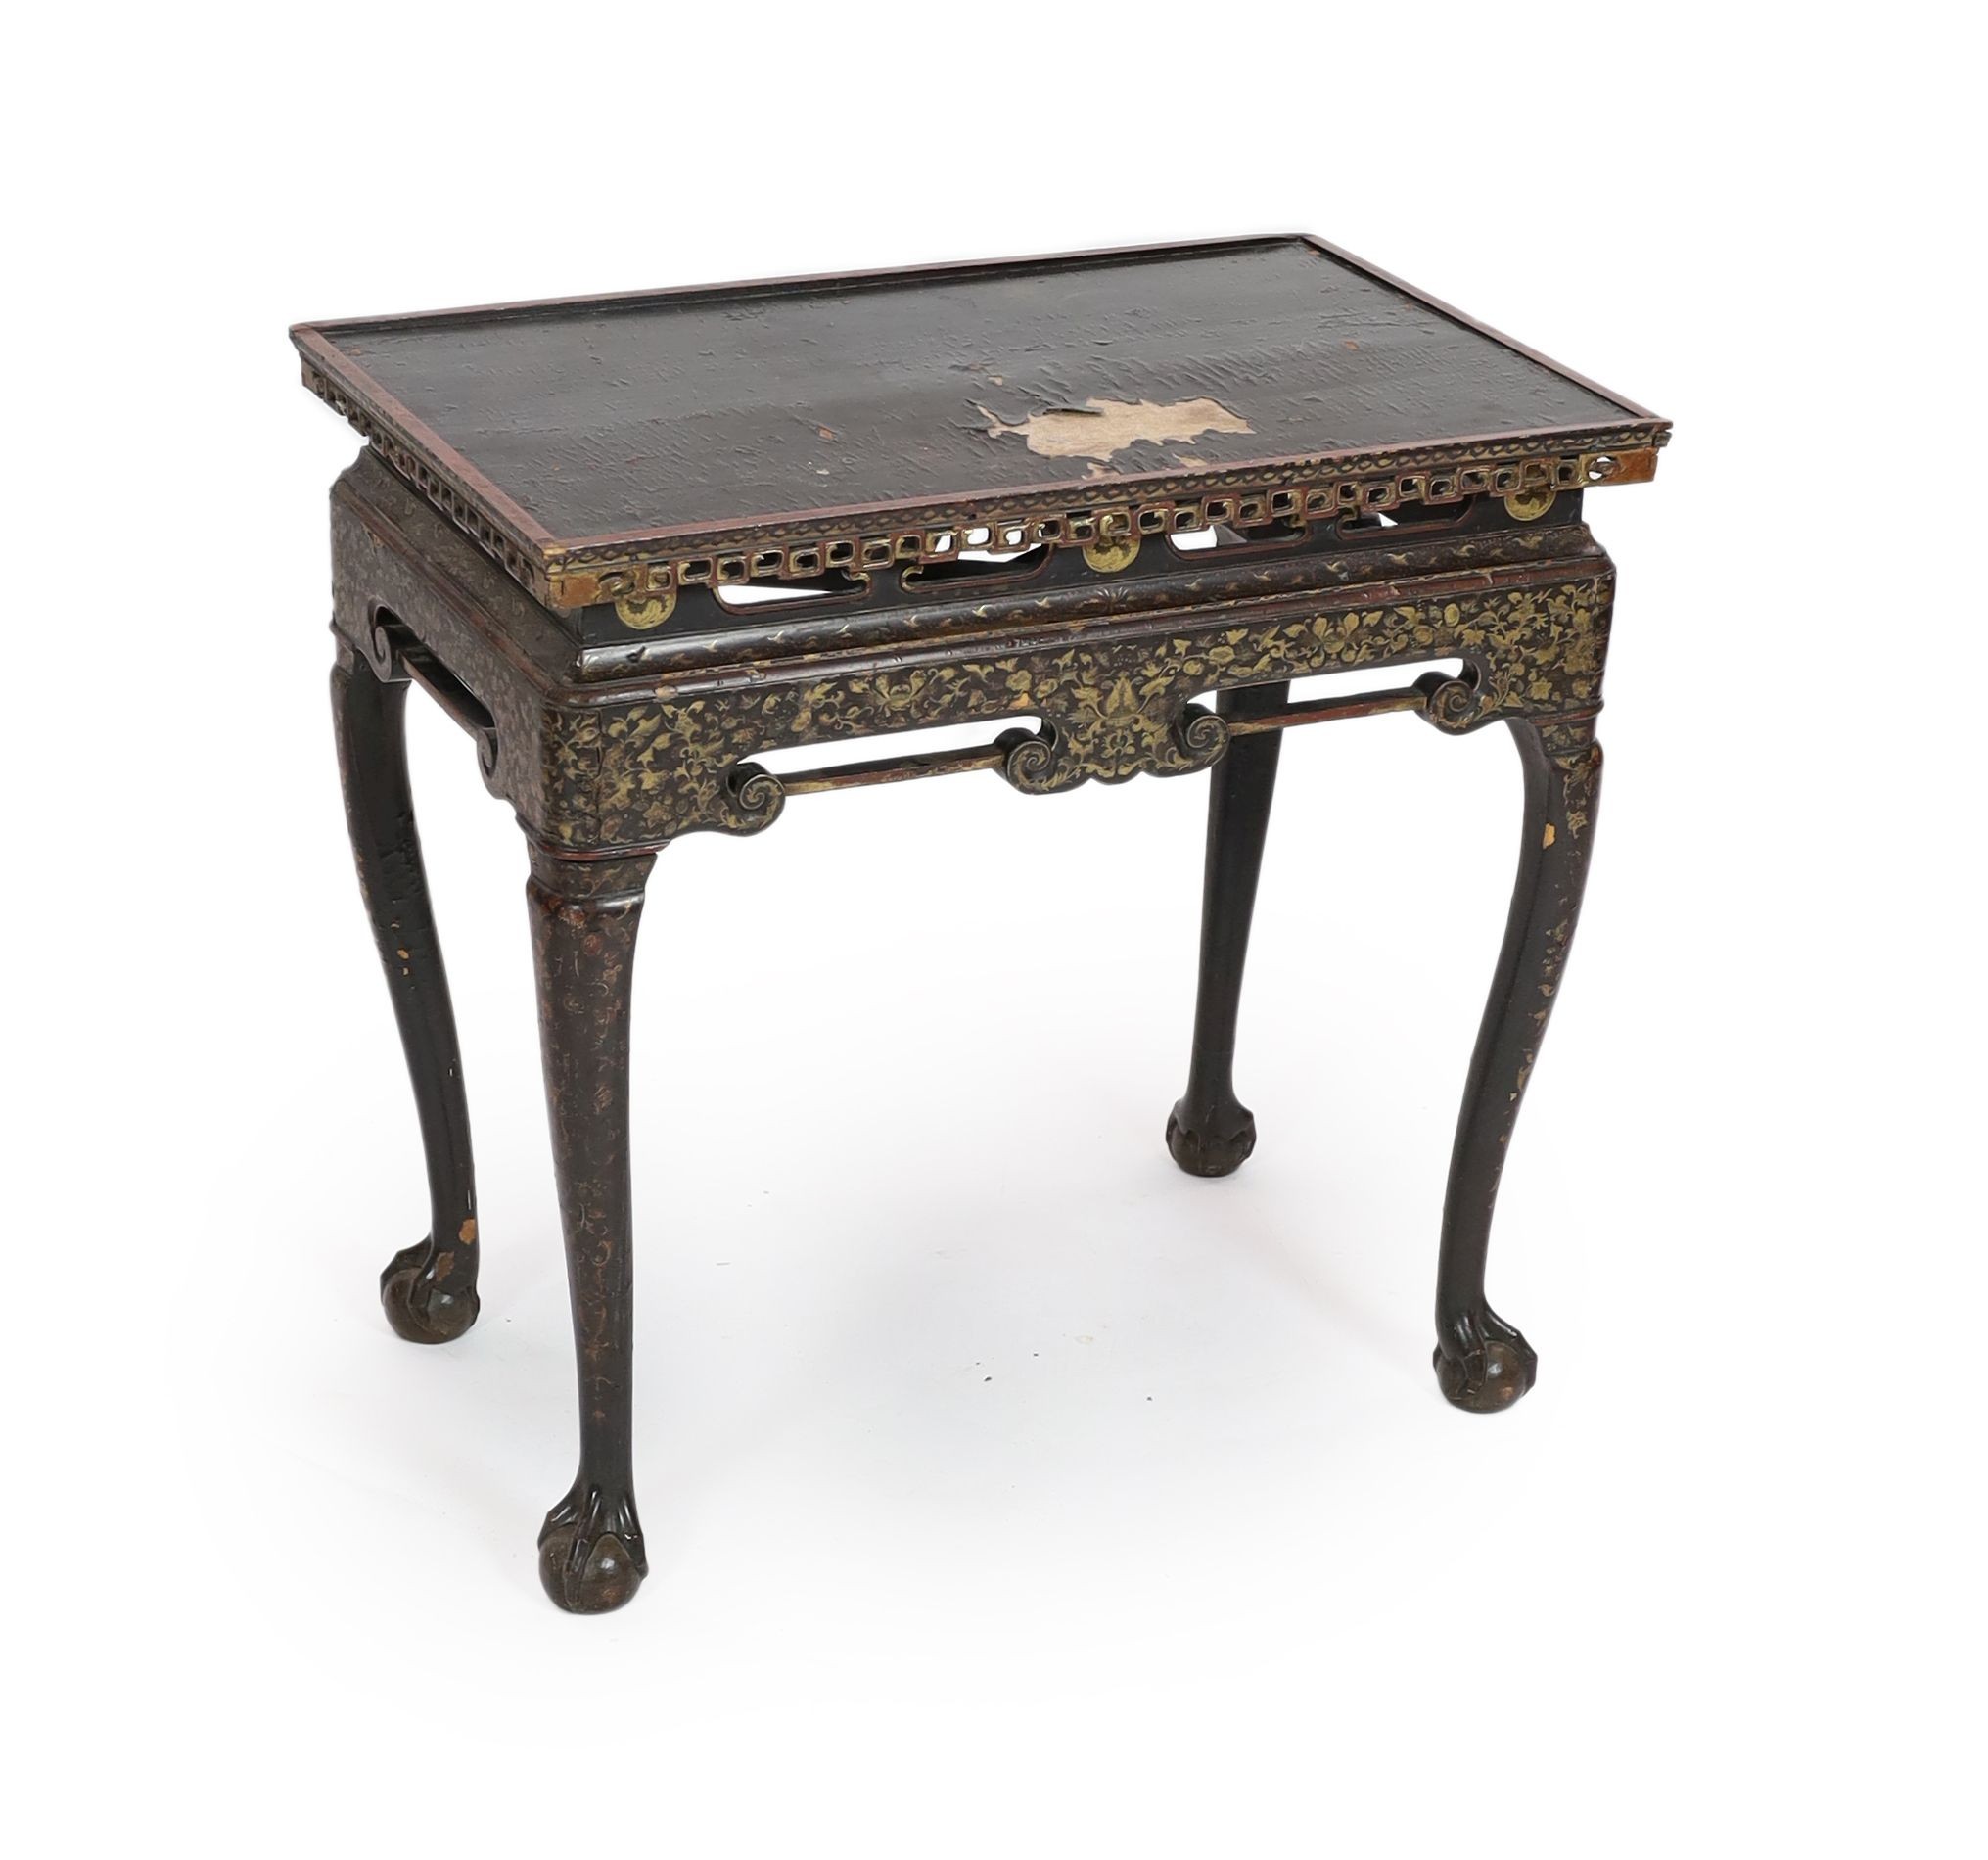 A Chinese export black lacquer and parcel-gilt stand, second half 18th Century, width 78cm, depth 48cm, height 74cm